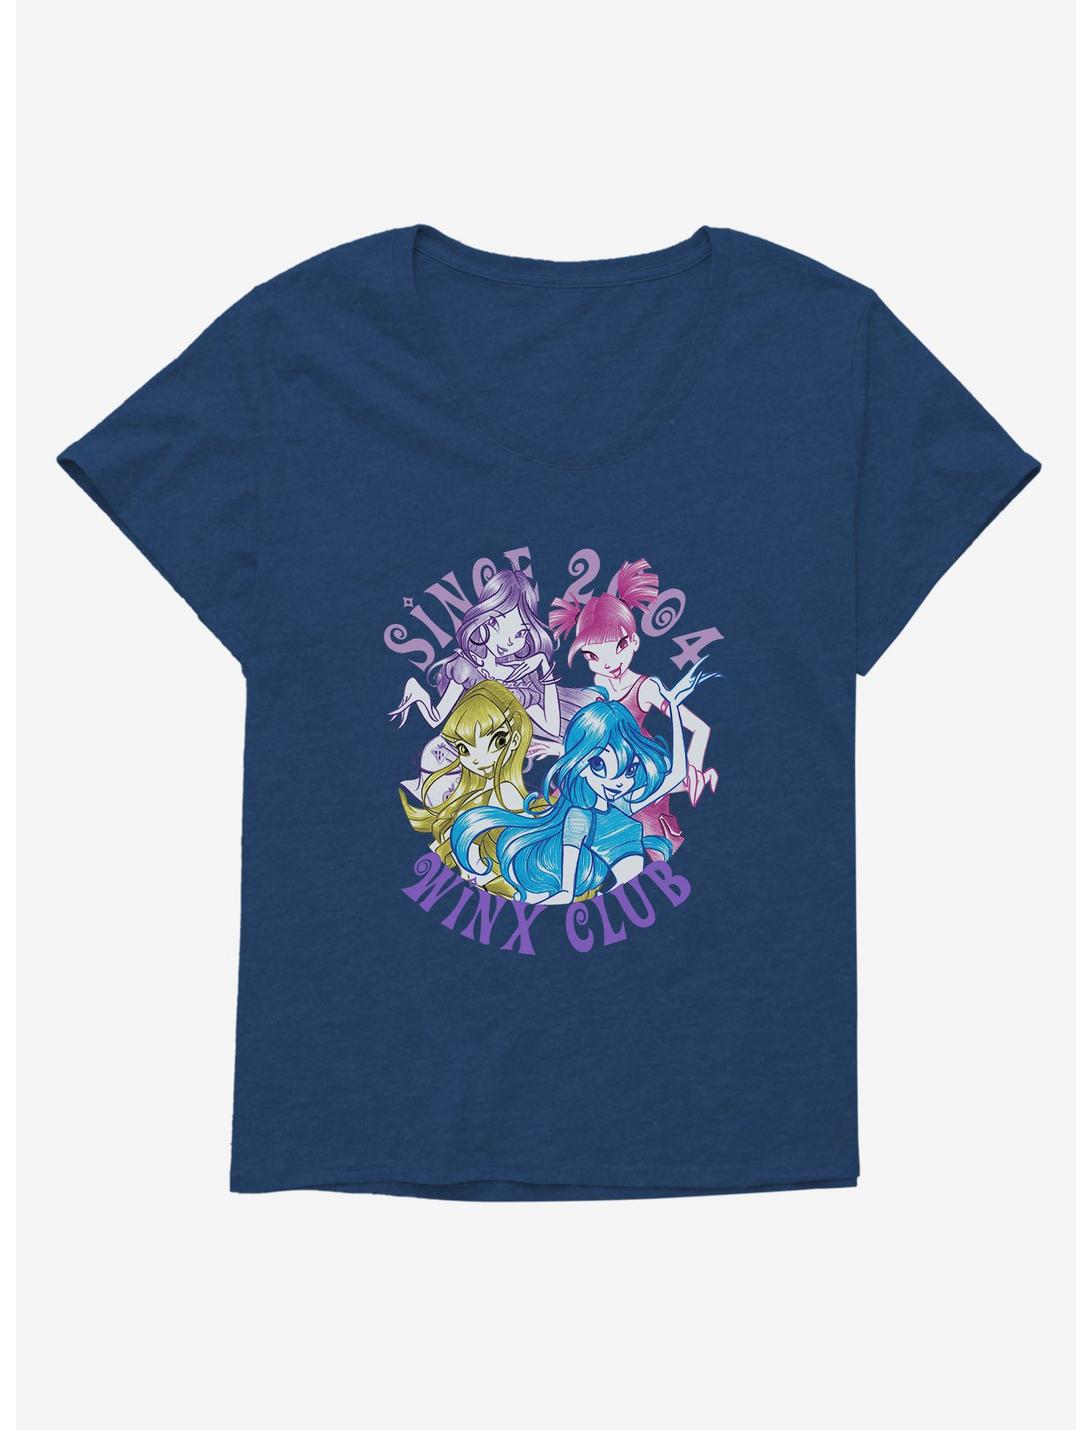 Winx Club Since 2004 Womens T-Shirt Plus Size, ATHLETIC NAVY, hi-res